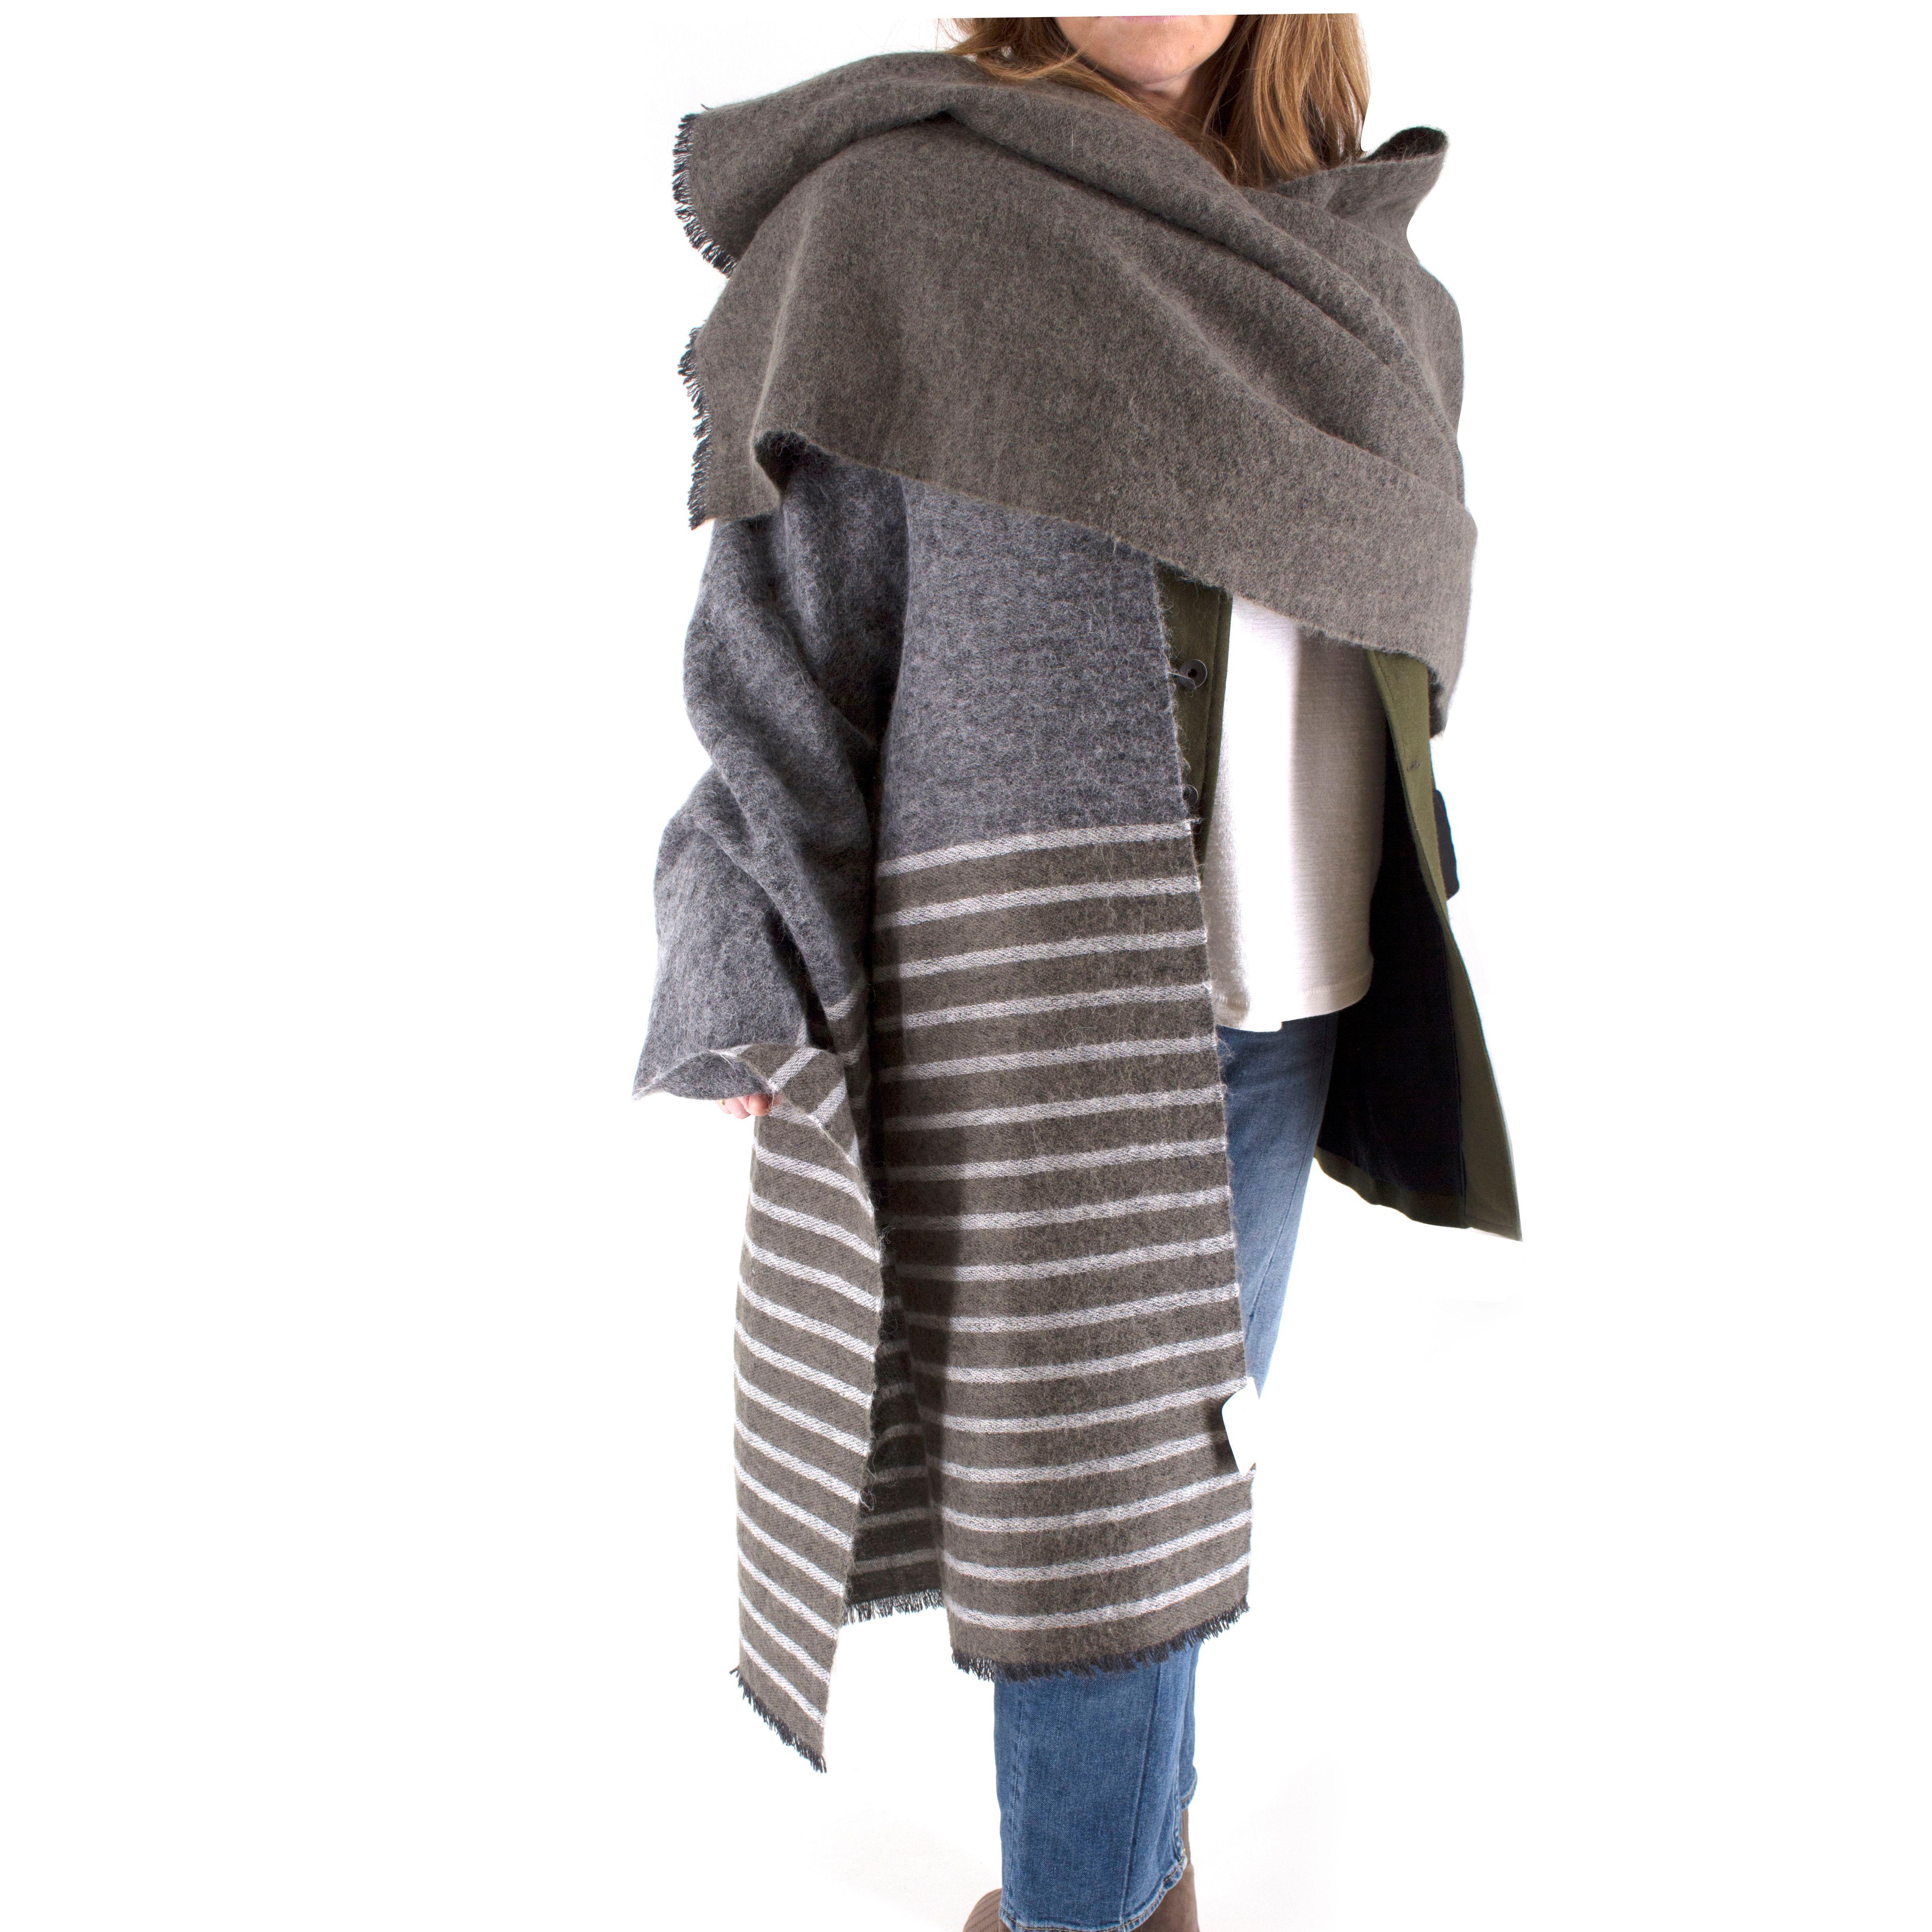 Brunello Cucinelli Grey Cashmere Striped Scarf

-Large grey scarf with light grey stripes and green accents
-Raw hem at ends
-Scarf features stripes of varied sizes 

Please note, these items are pre-owned and may show signs of being stored even